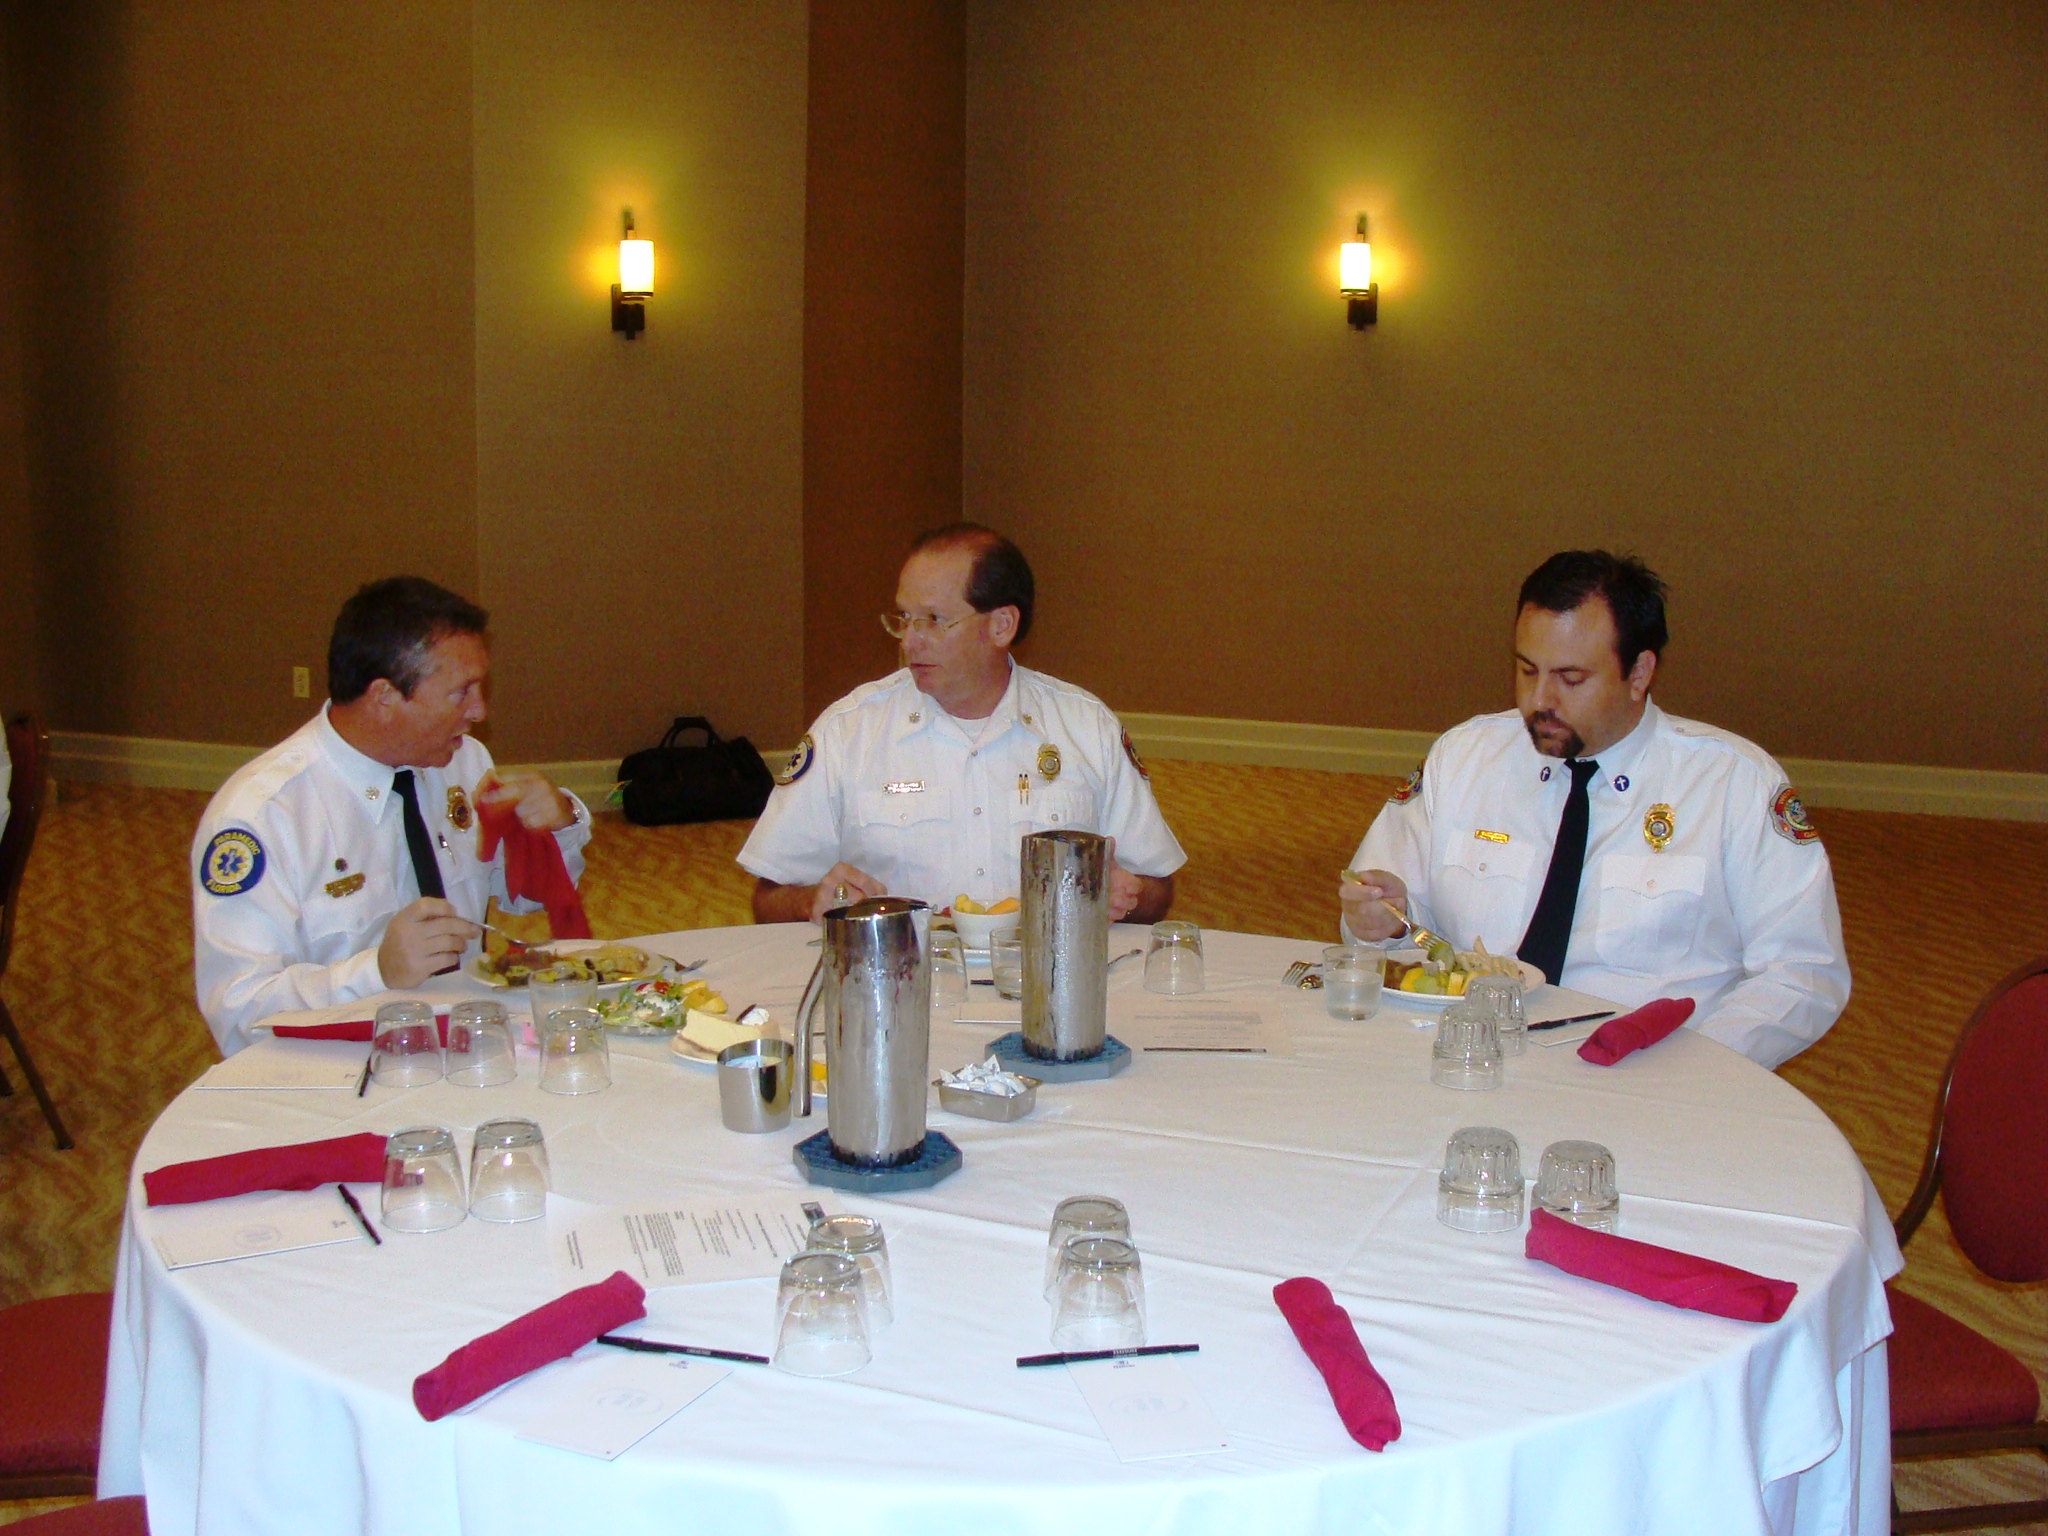 Installation of 2009 Officers